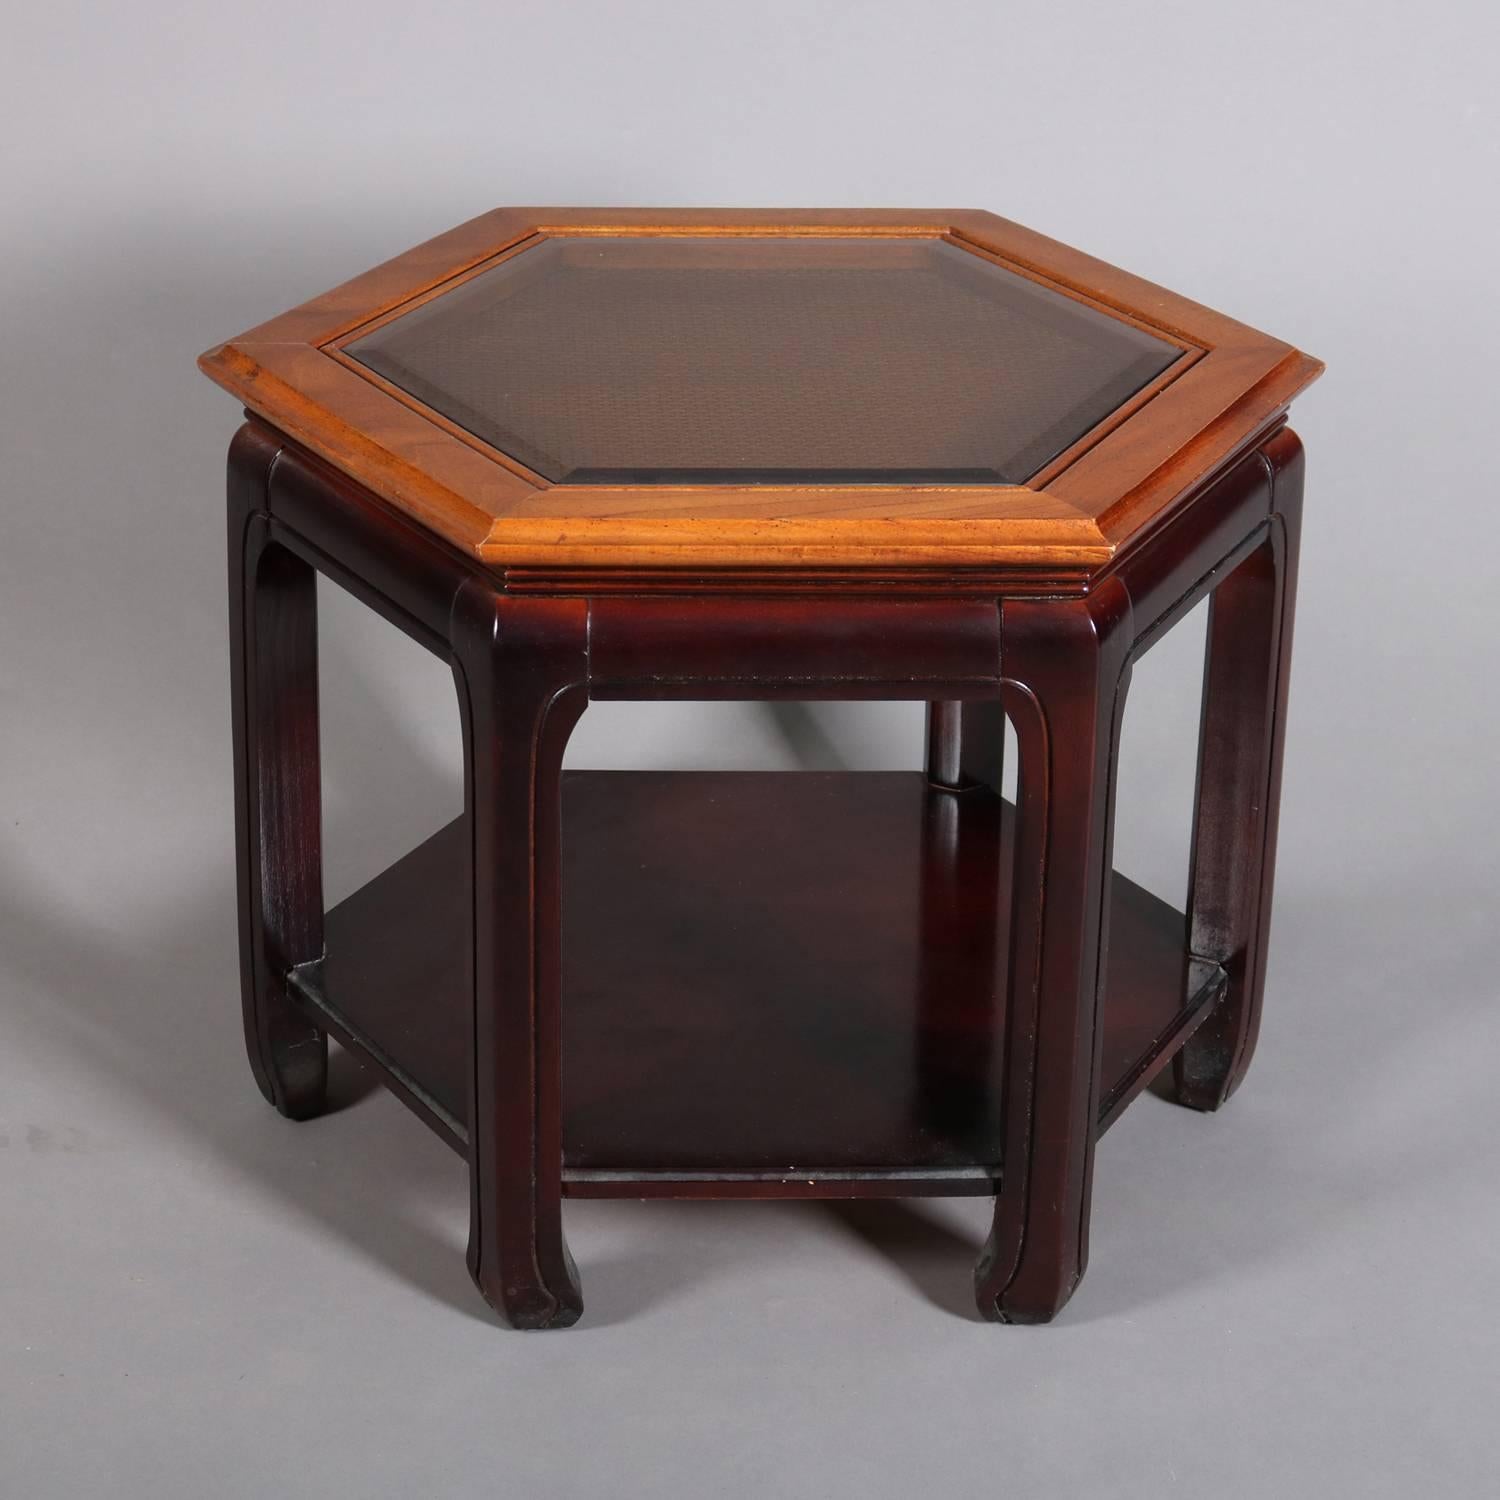 Antique Chinese style hexagonal coffee table features mahogany base with glass covered caned top, 20th century

*Matching coffee table listed separately*

Measures - 21